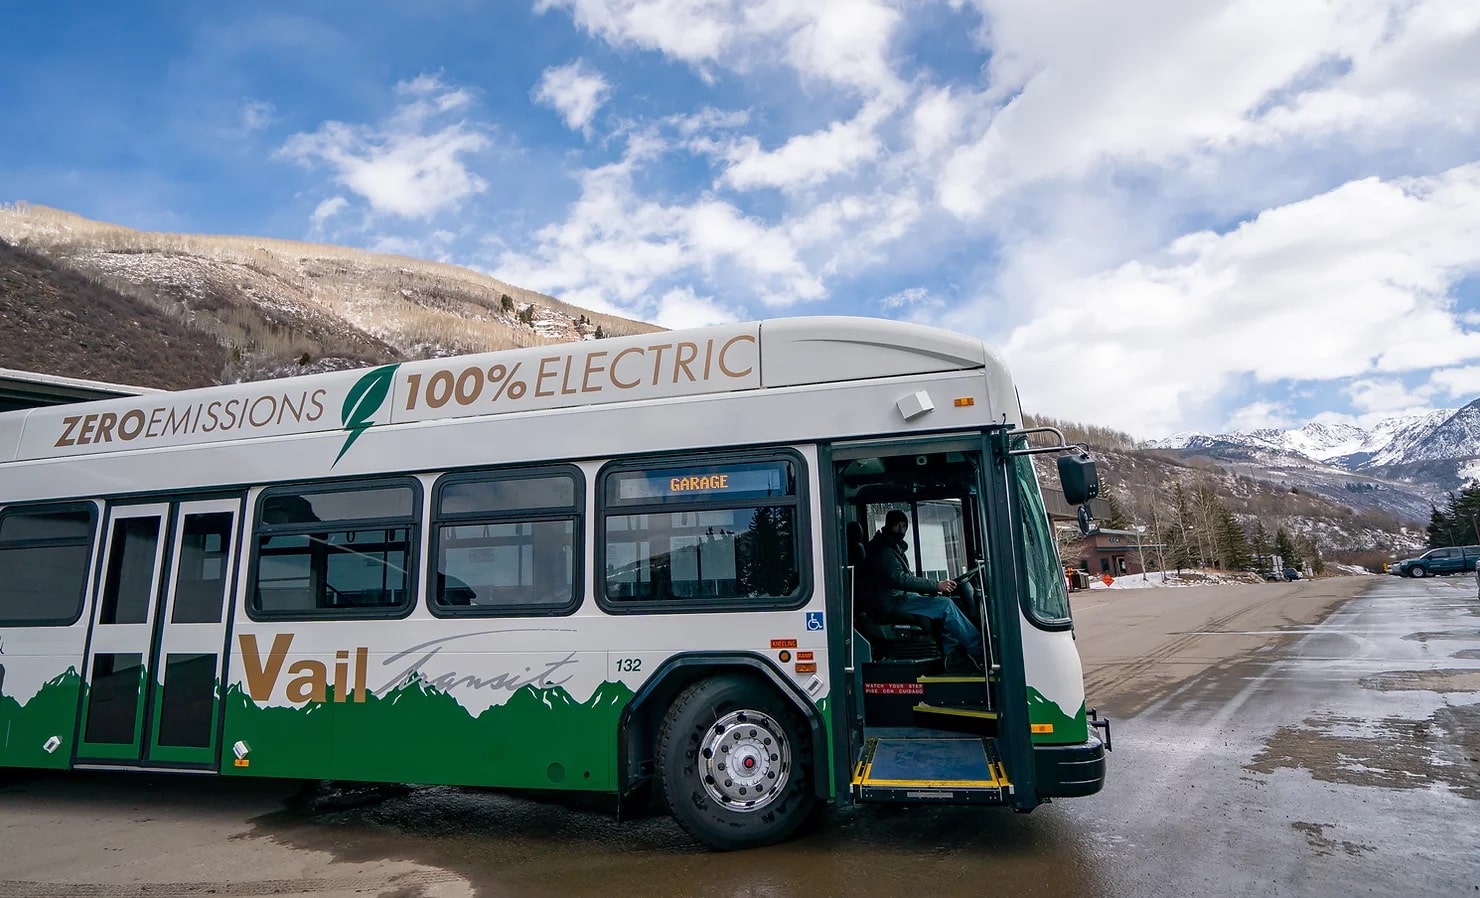 Town of Vail to Receive $1.8 Million Grant for Clean Transit